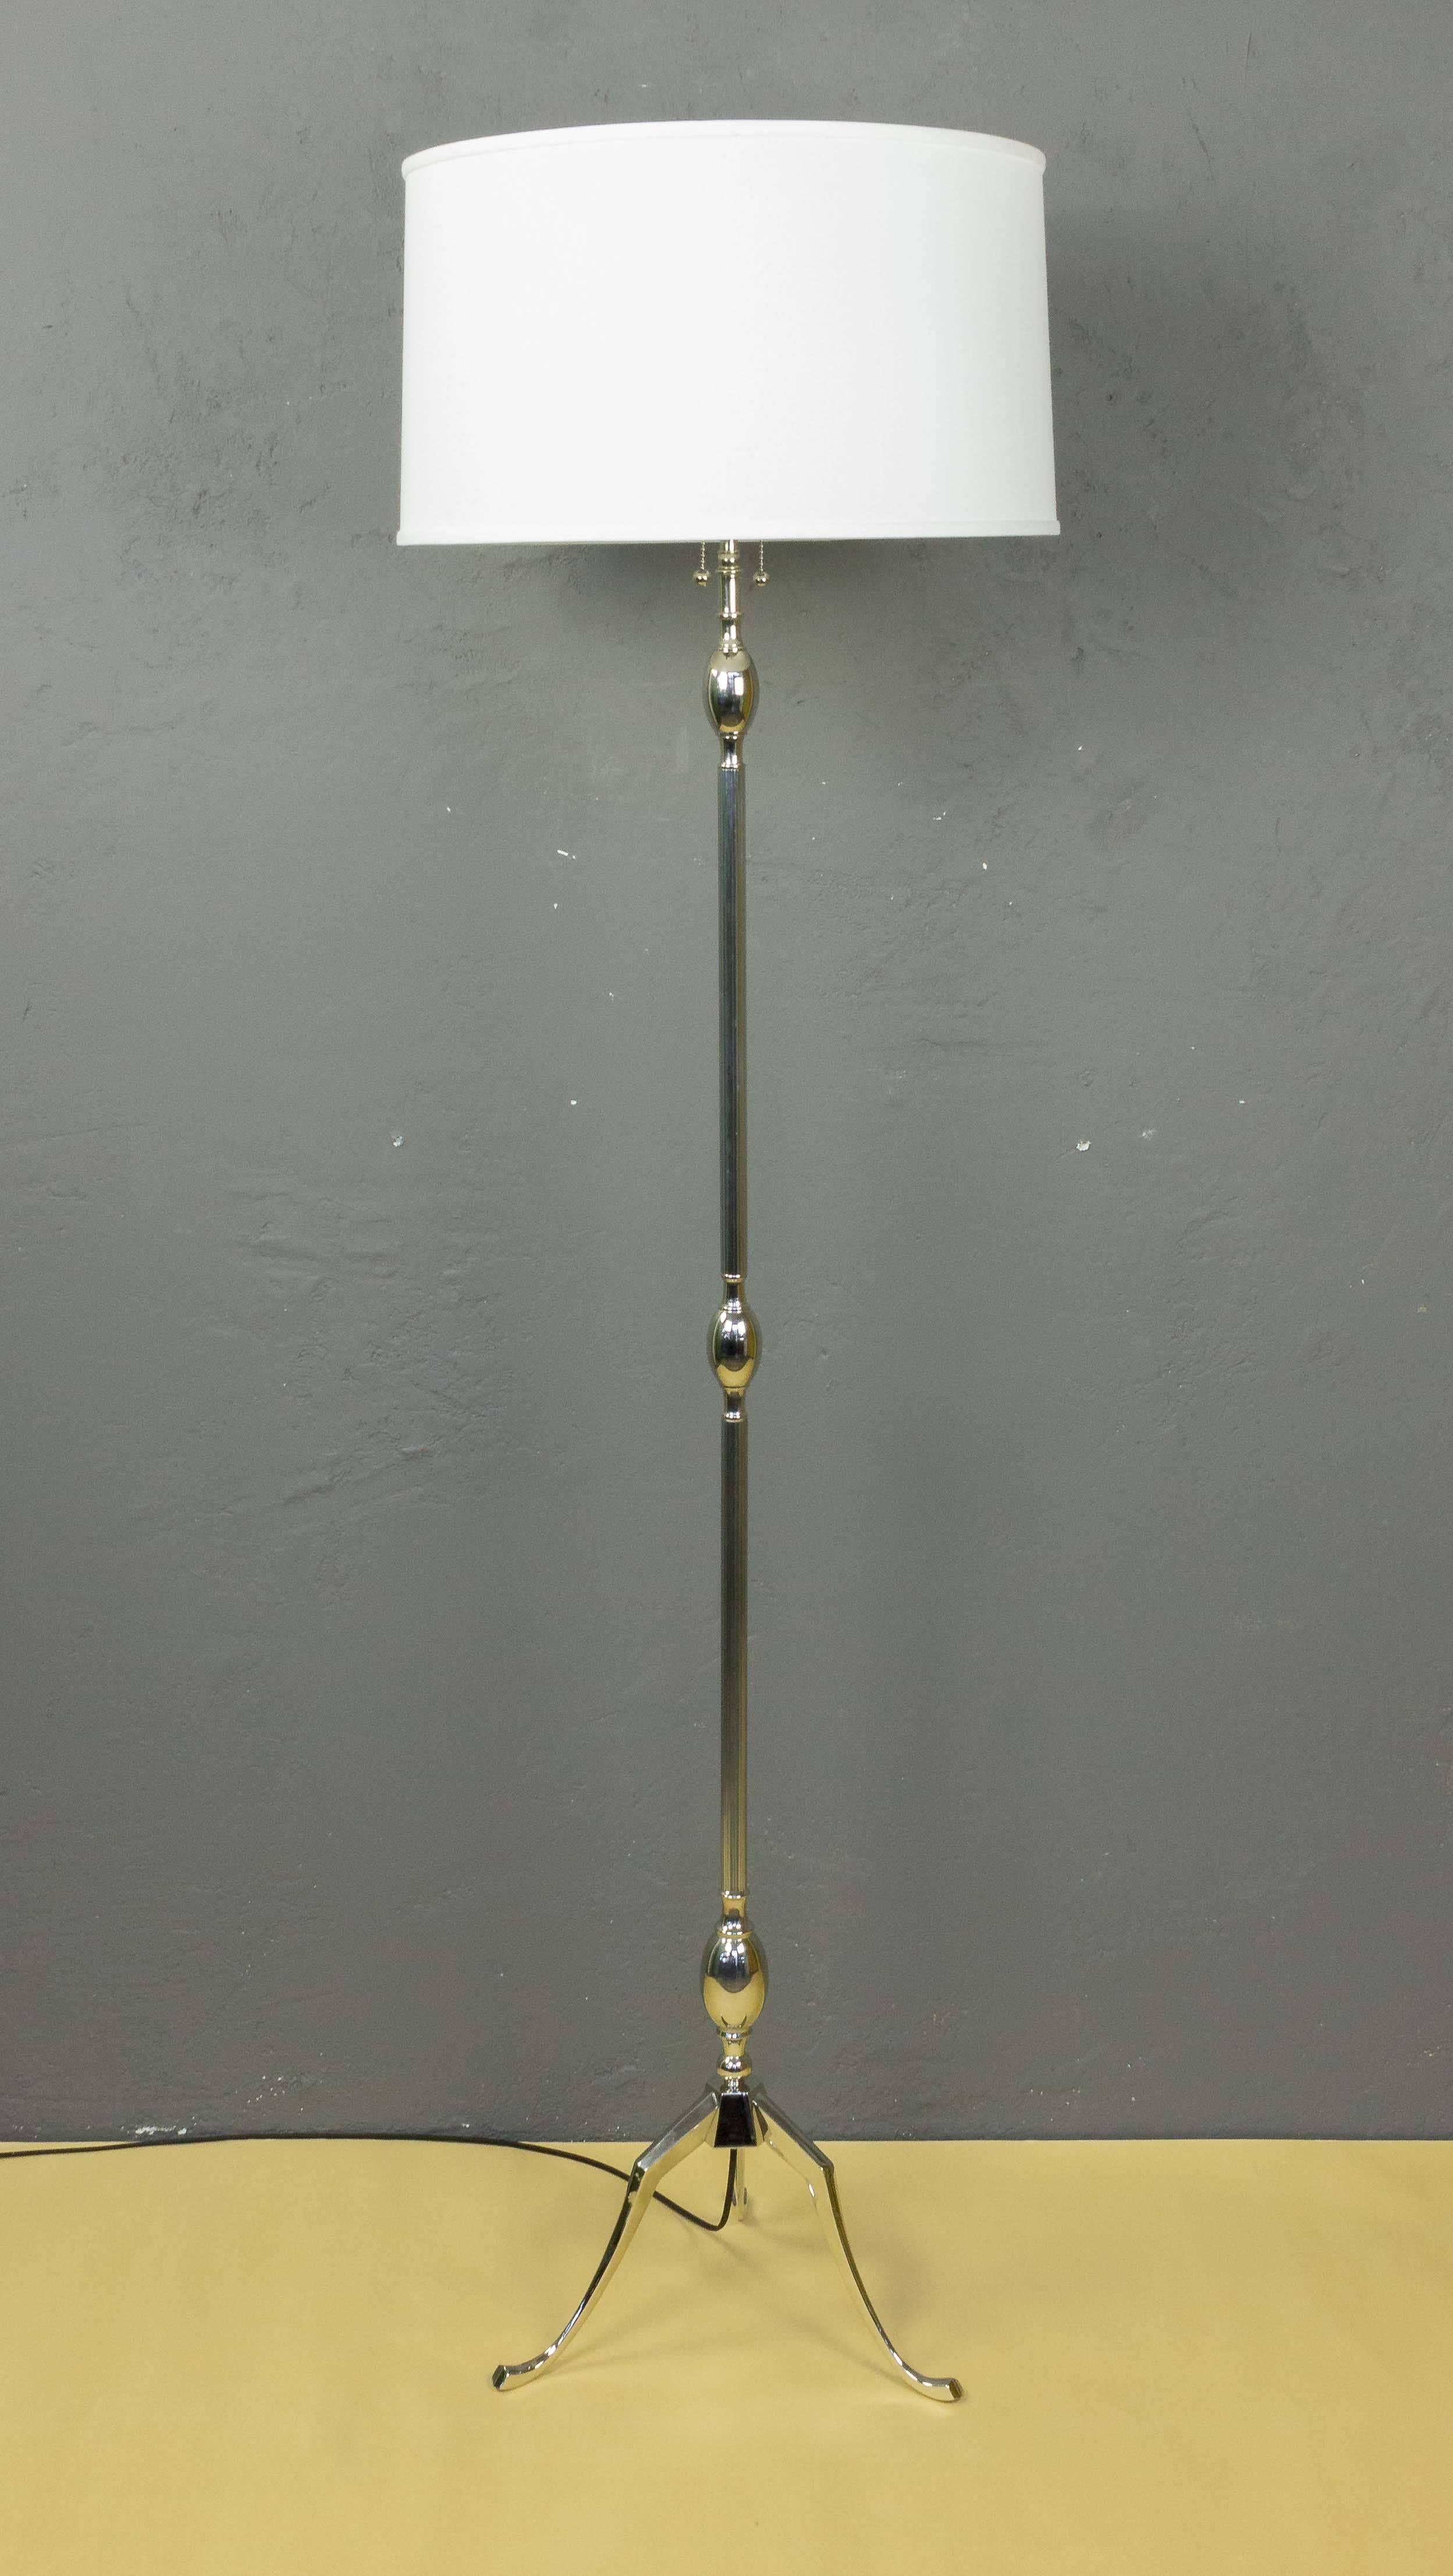 French 1940s nickel-plated floor lamp with tripod base and three egg shaped dividers on center stem. The item is listed in good vintage condition but the plating is not new.

Not sold with shade.